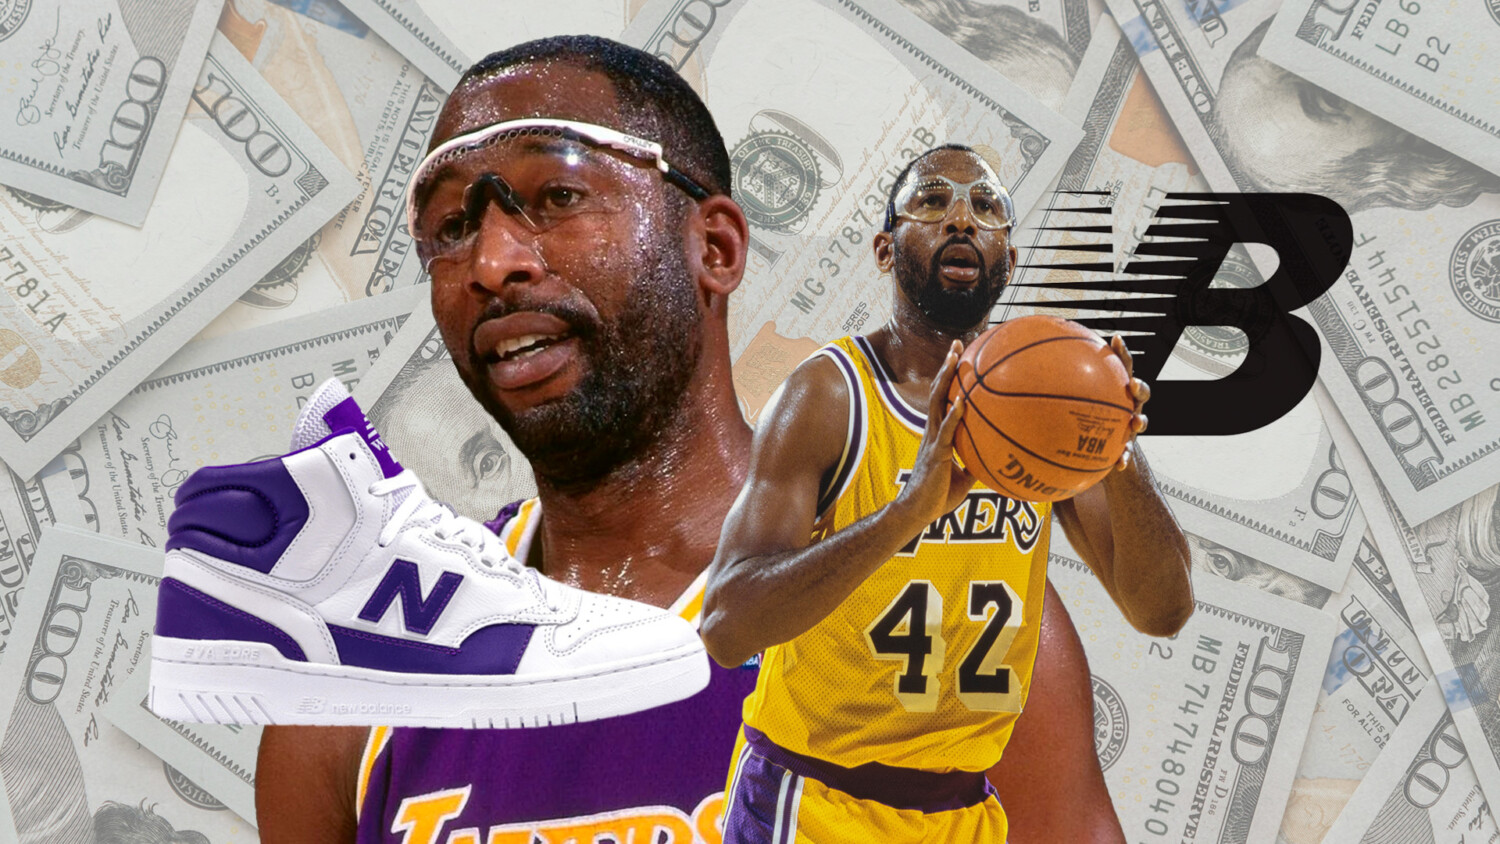 James Worthy & New Balance: The First Million Dollar Shoe Deal